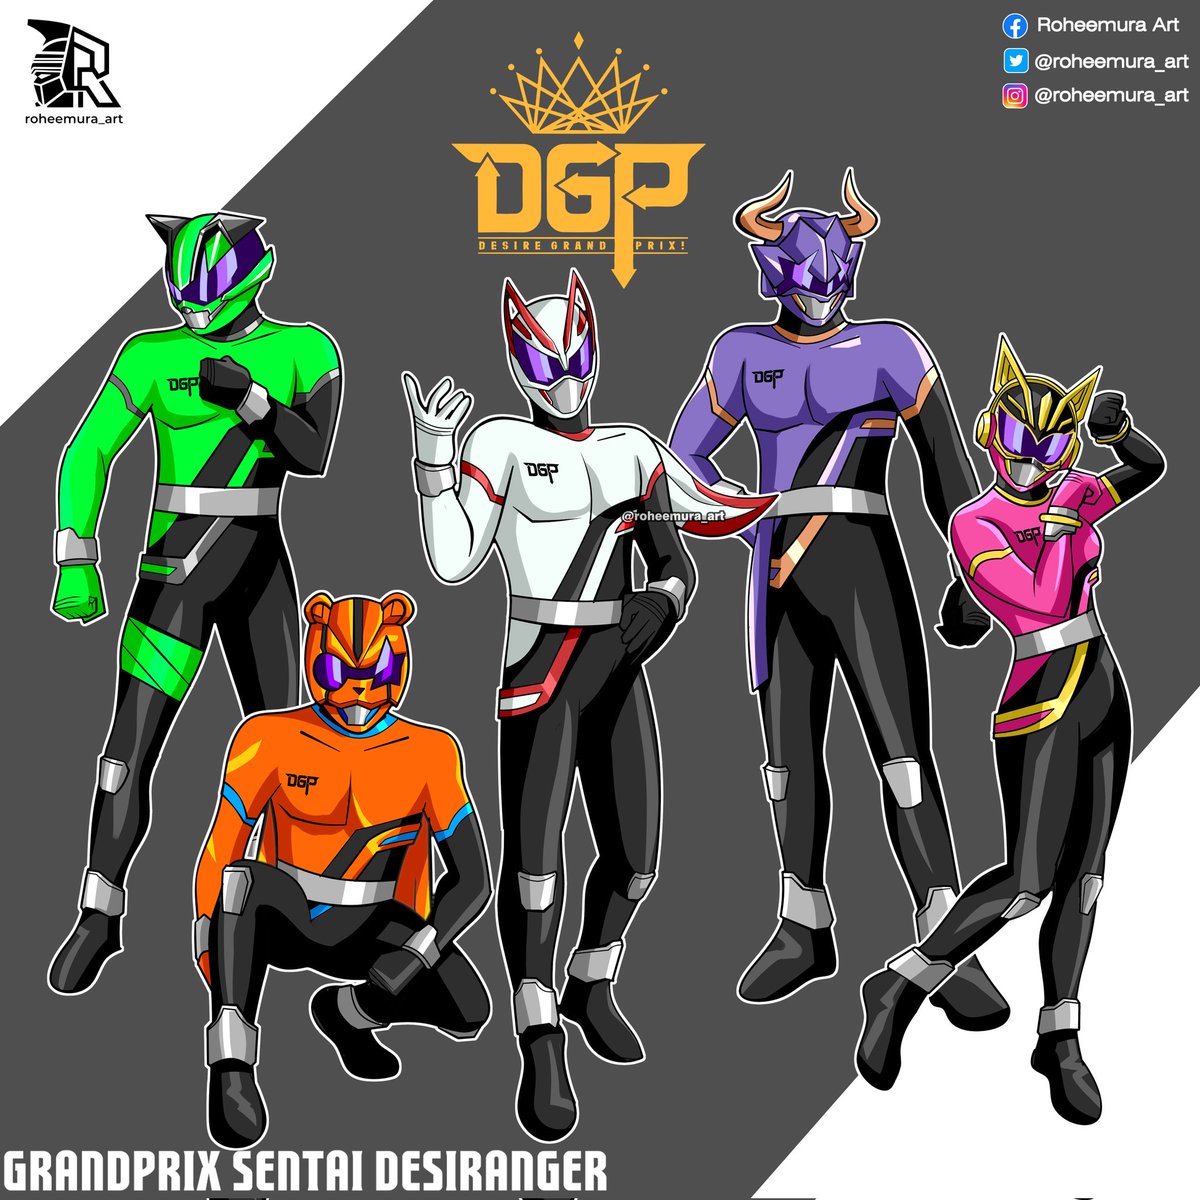 Got this in my mind but never got time to draw it. Finally got time to quickly draw this lol
Grandprix Sentai Desiranger.. Based on DGP Rider from Kamen Rider Geats... 

#KamenRiderGeats